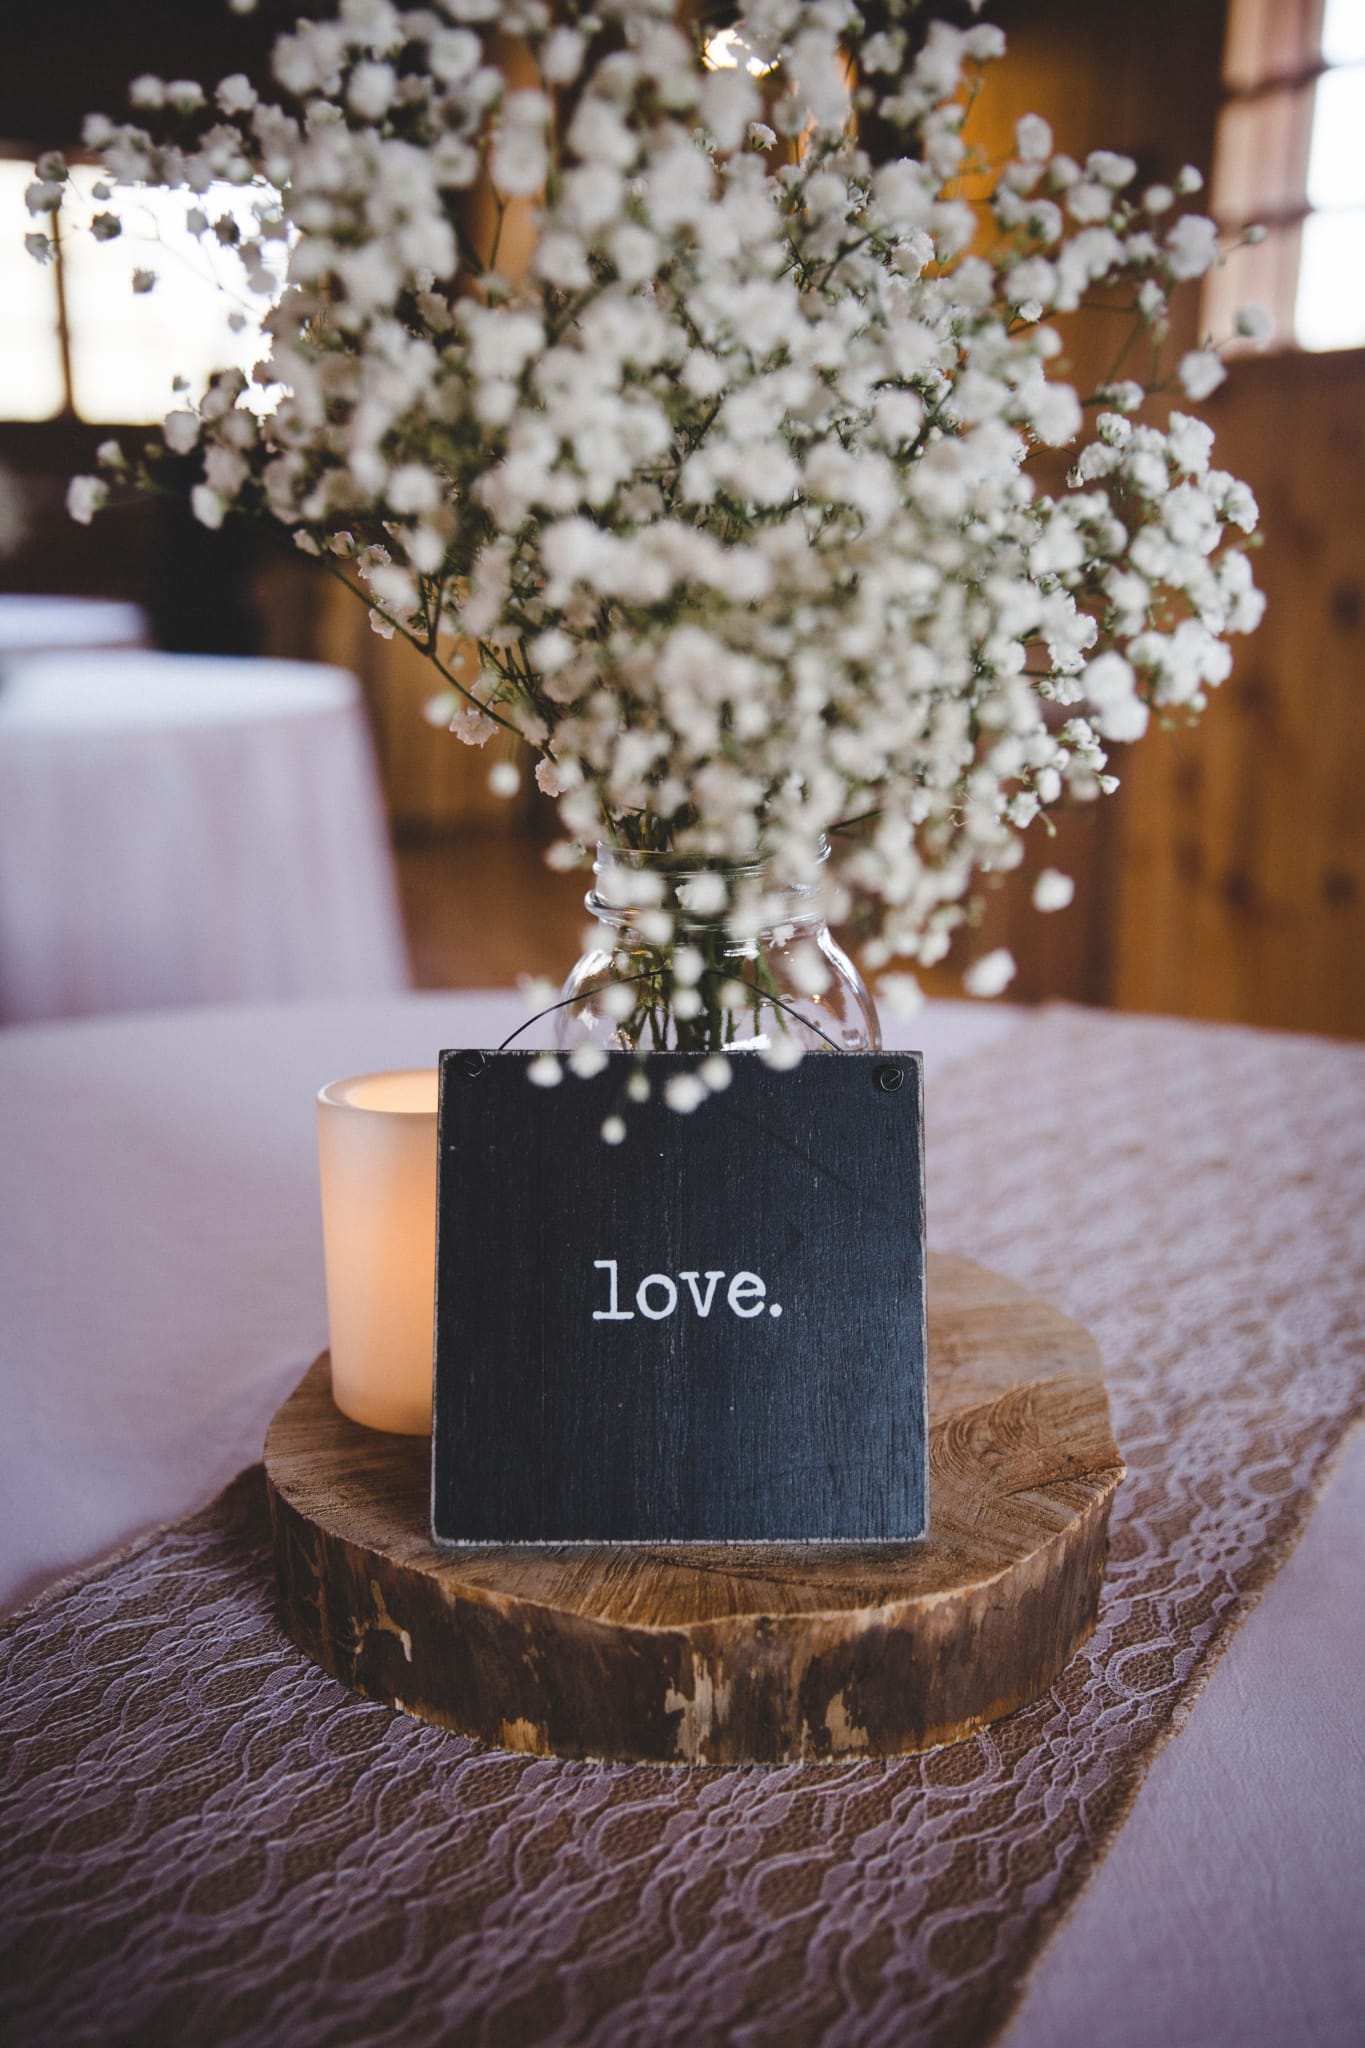 Wedding Escort Cards vs. Place Cards: What’s the Difference?